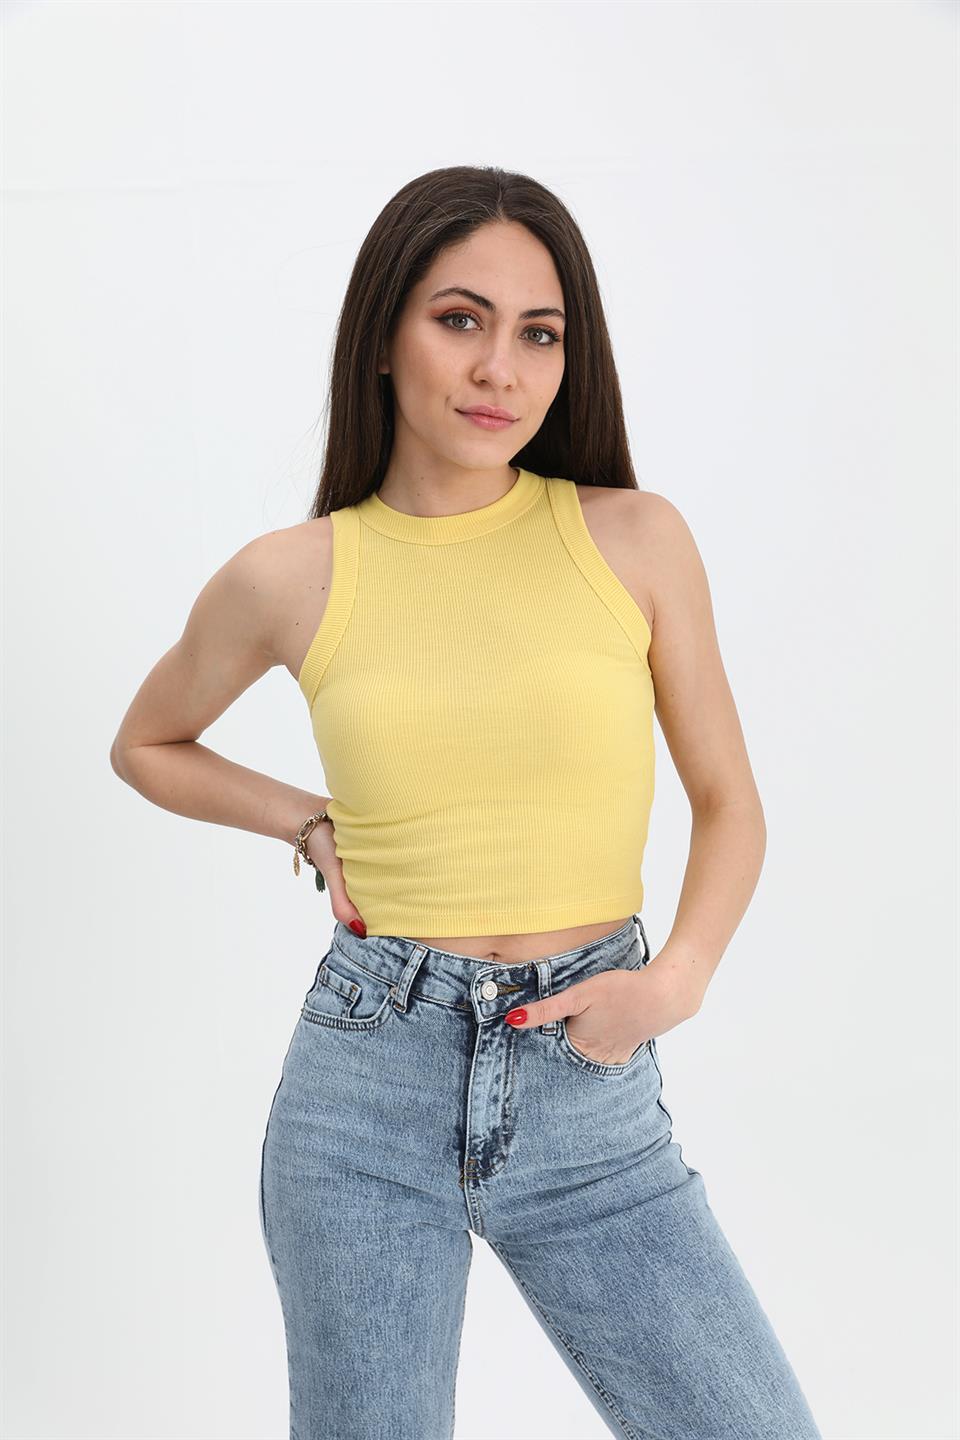 Women's Blouse Wide Plunging Sleeveless Camisole - Yellow - STREETMODE ™